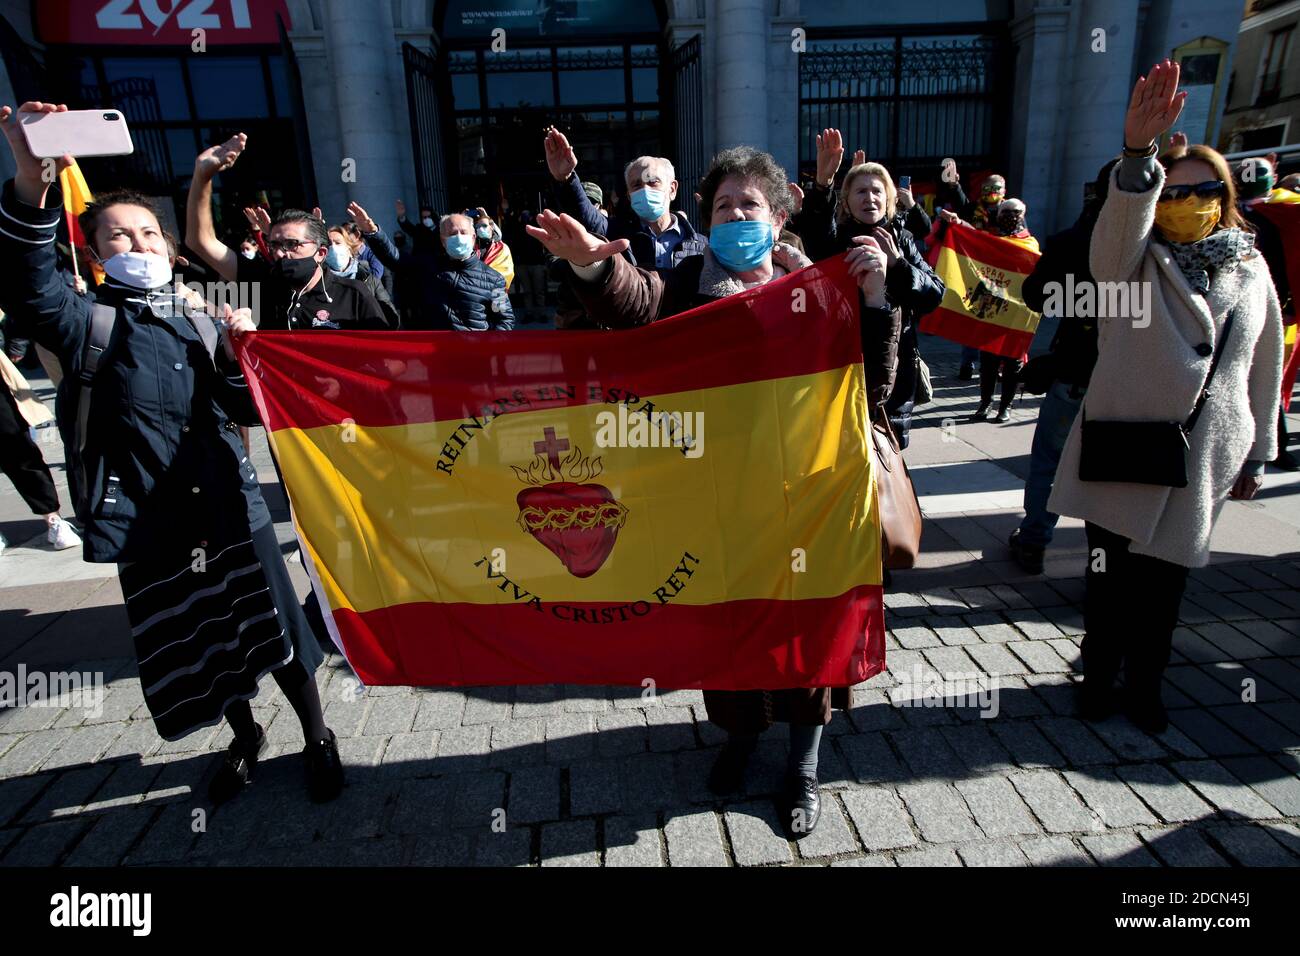 Madrid, Spain; 22/11/2020.- 'I will reign in Spain . Long live Christ the King' text on the flag.Tribute to the coup general Francisco Franco on the anniversary of his death on 20/11/1975, the Spanish Catholic Movement party founded José Luis Corral split from another extreme right group called Fuerza Nueva and which vindicates Franco and the Francoist side of the Civil War, which he considers a 'Crusade'. They carry pre-constitutional flags and make the fascist salute. Fascist salute is the salute that the followers of the movements of this ideology use today. It is a variant of the Roman s Stock Photo